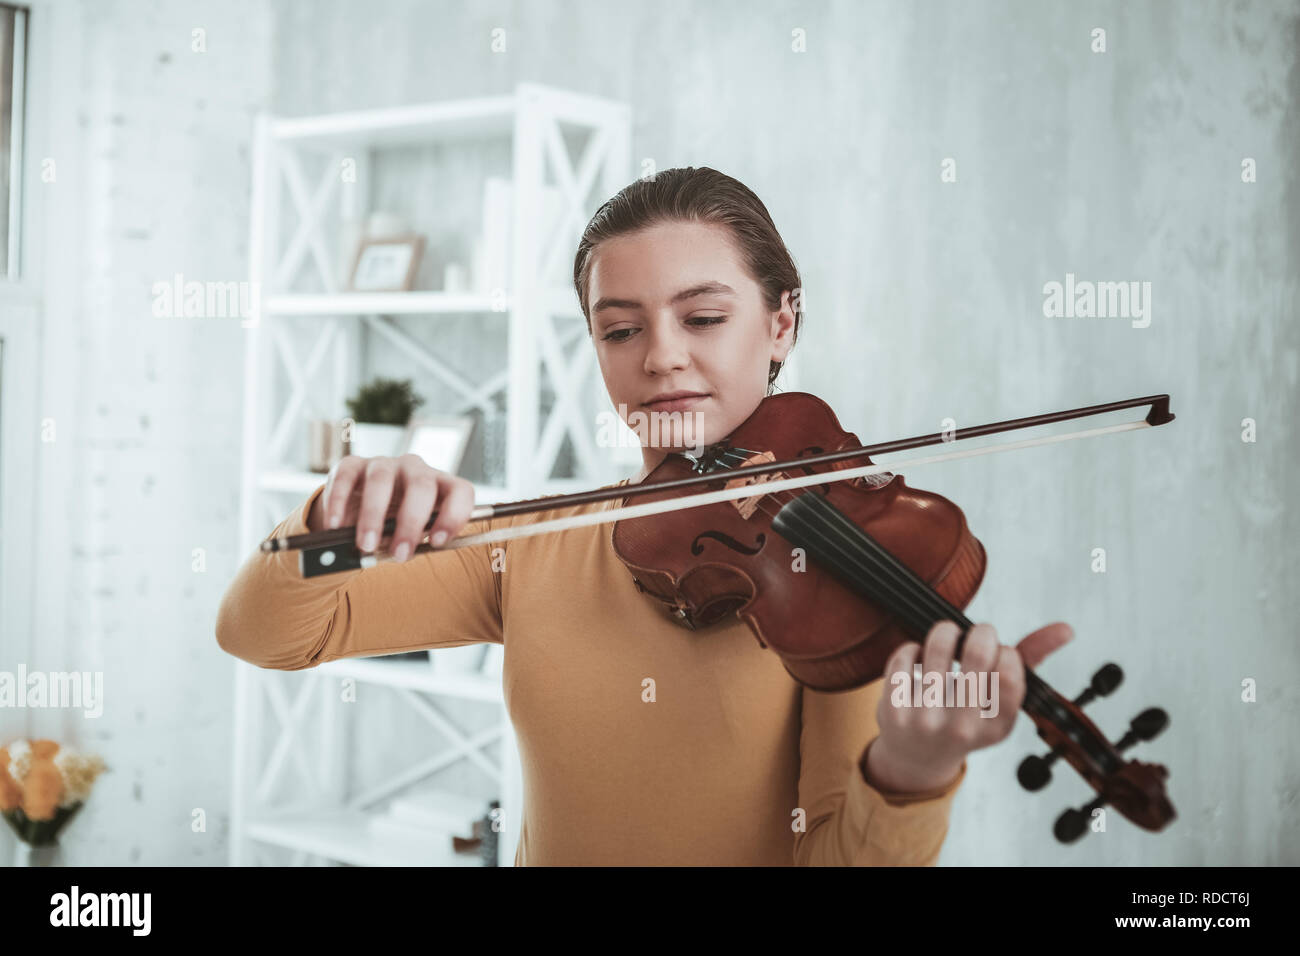 Nice good looking girl holding a violin bow Stock Photo